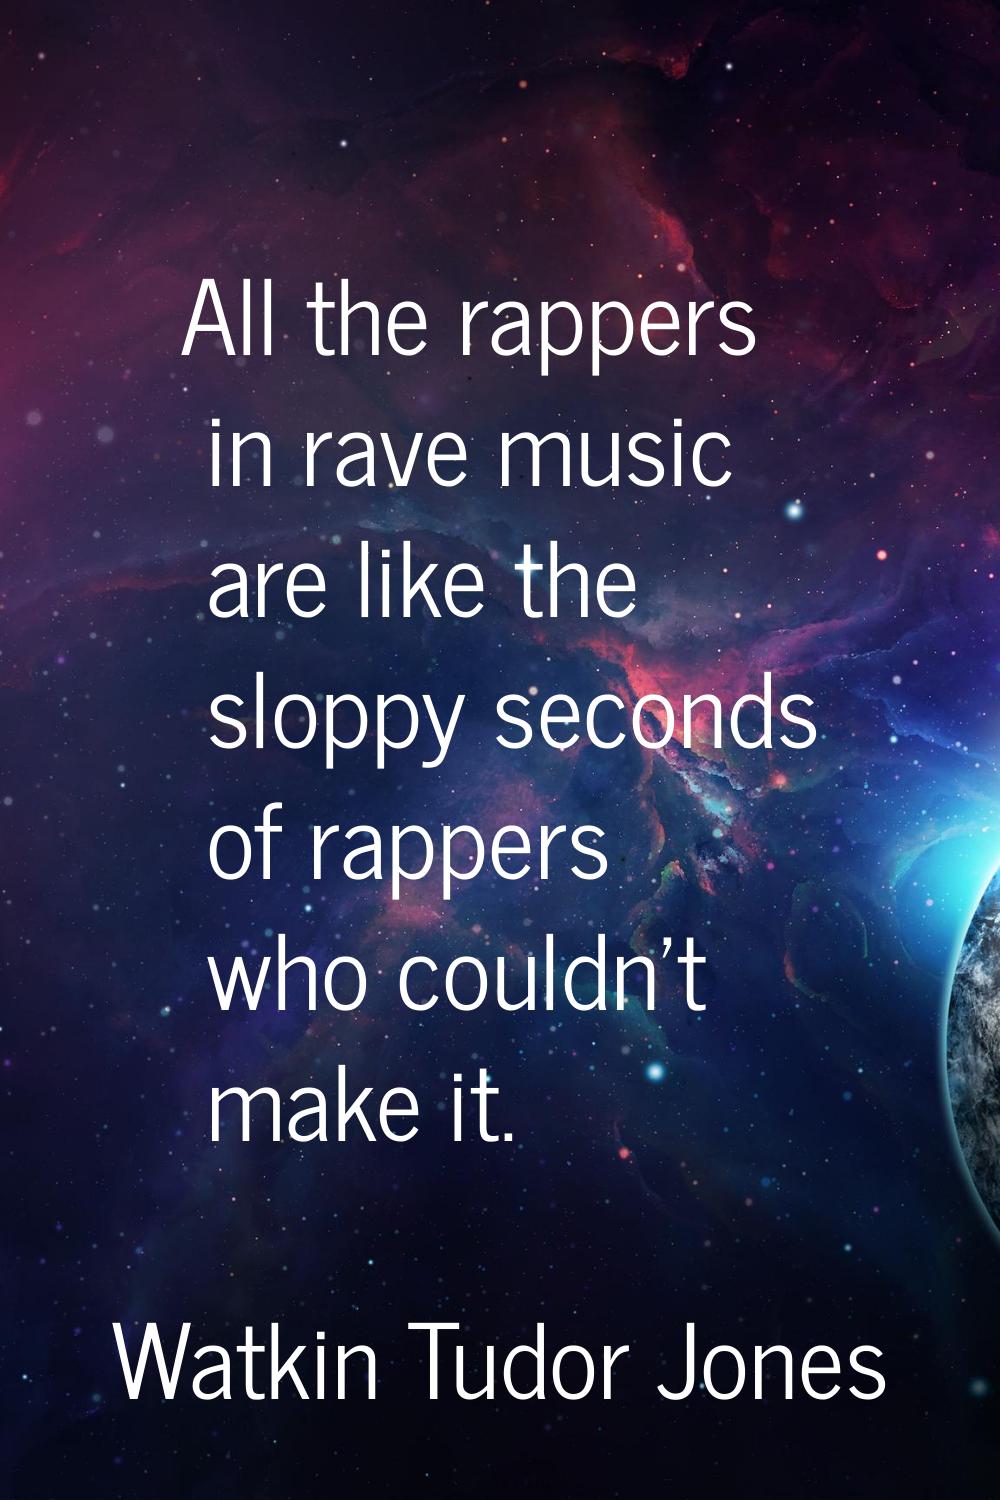 All the rappers in rave music are like the sloppy seconds of rappers who couldn't make it.